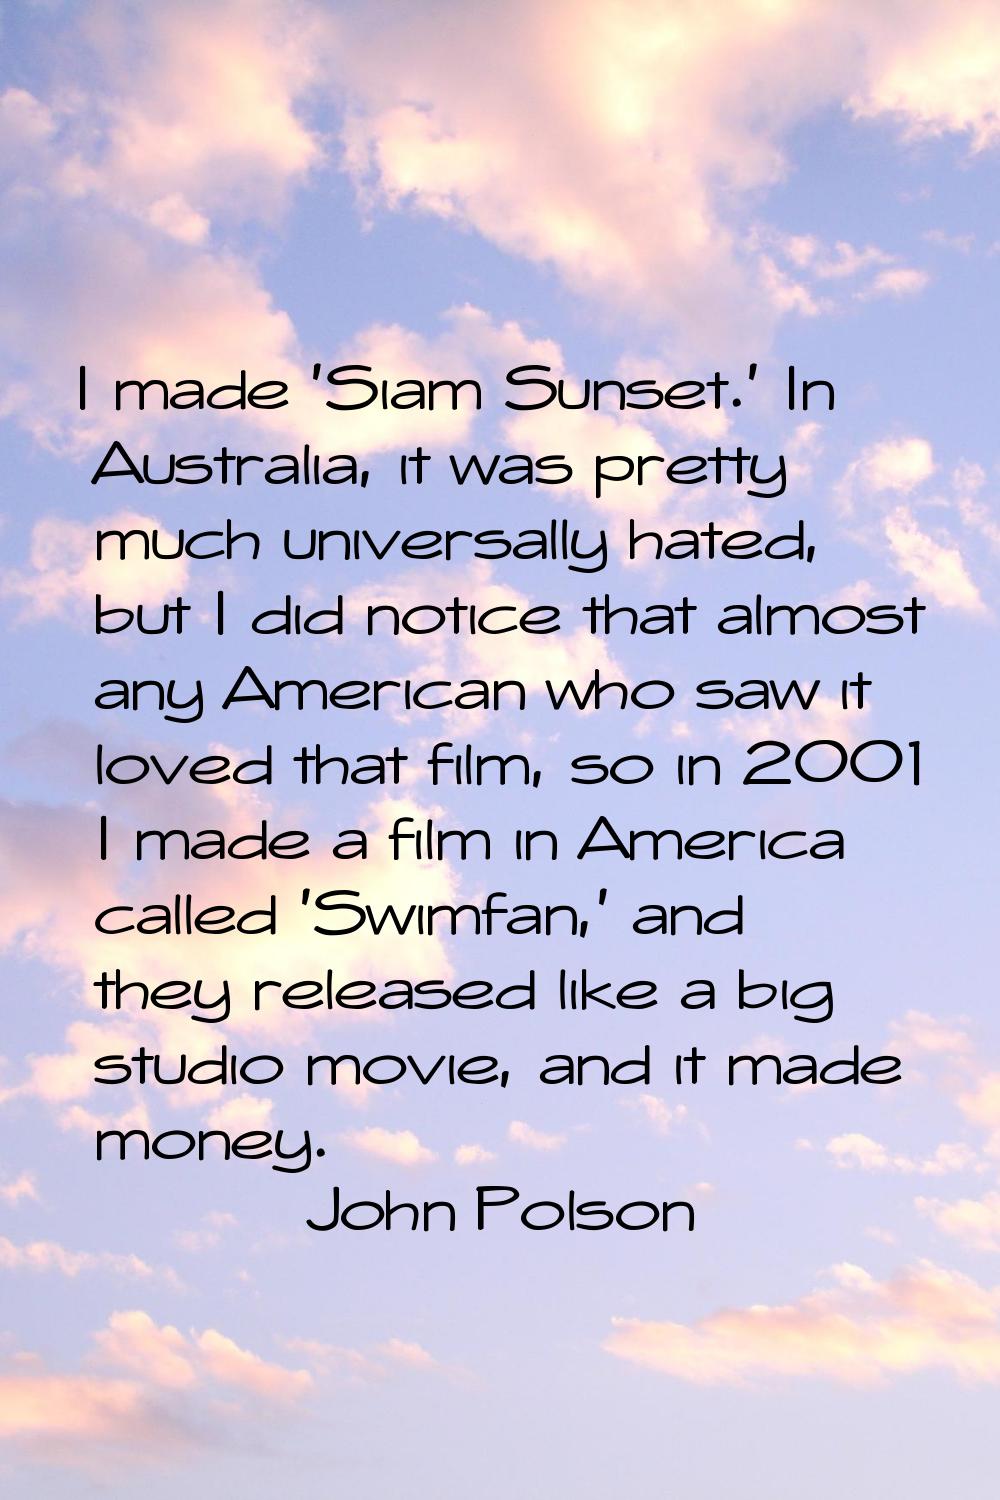 I made 'Siam Sunset.' In Australia, it was pretty much universally hated, but I did notice that alm